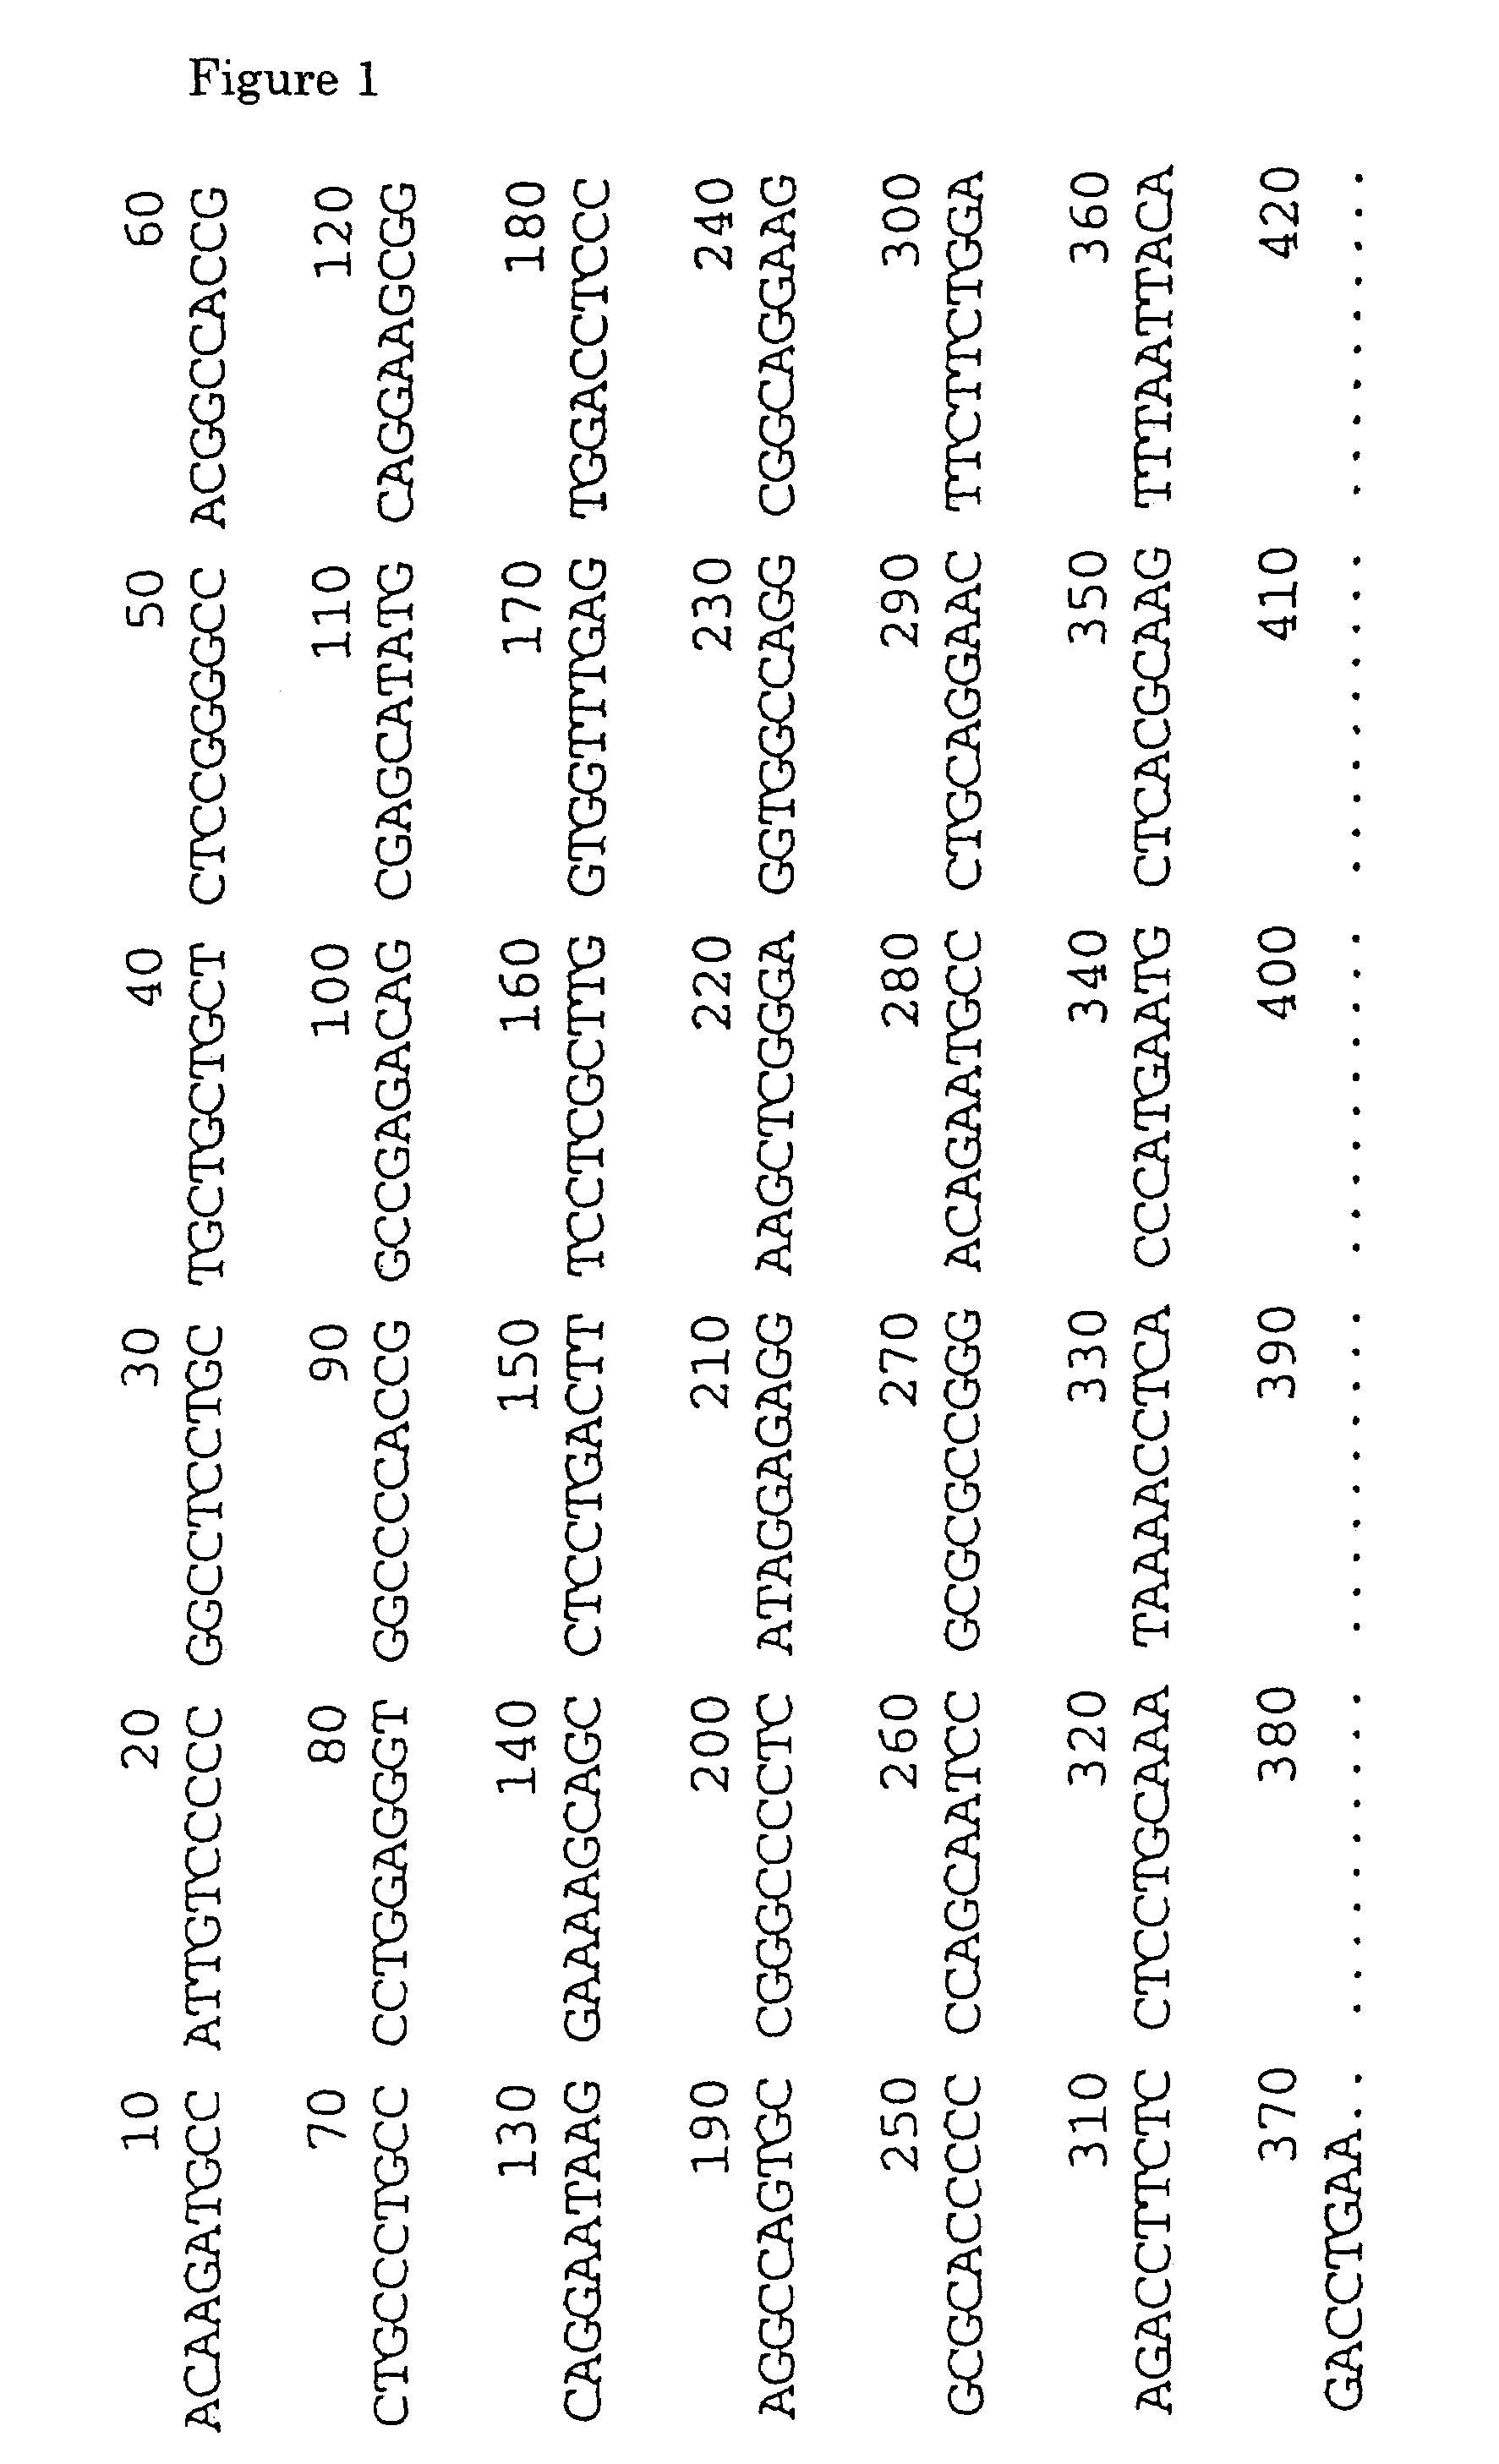 Peptides and production and use thereof